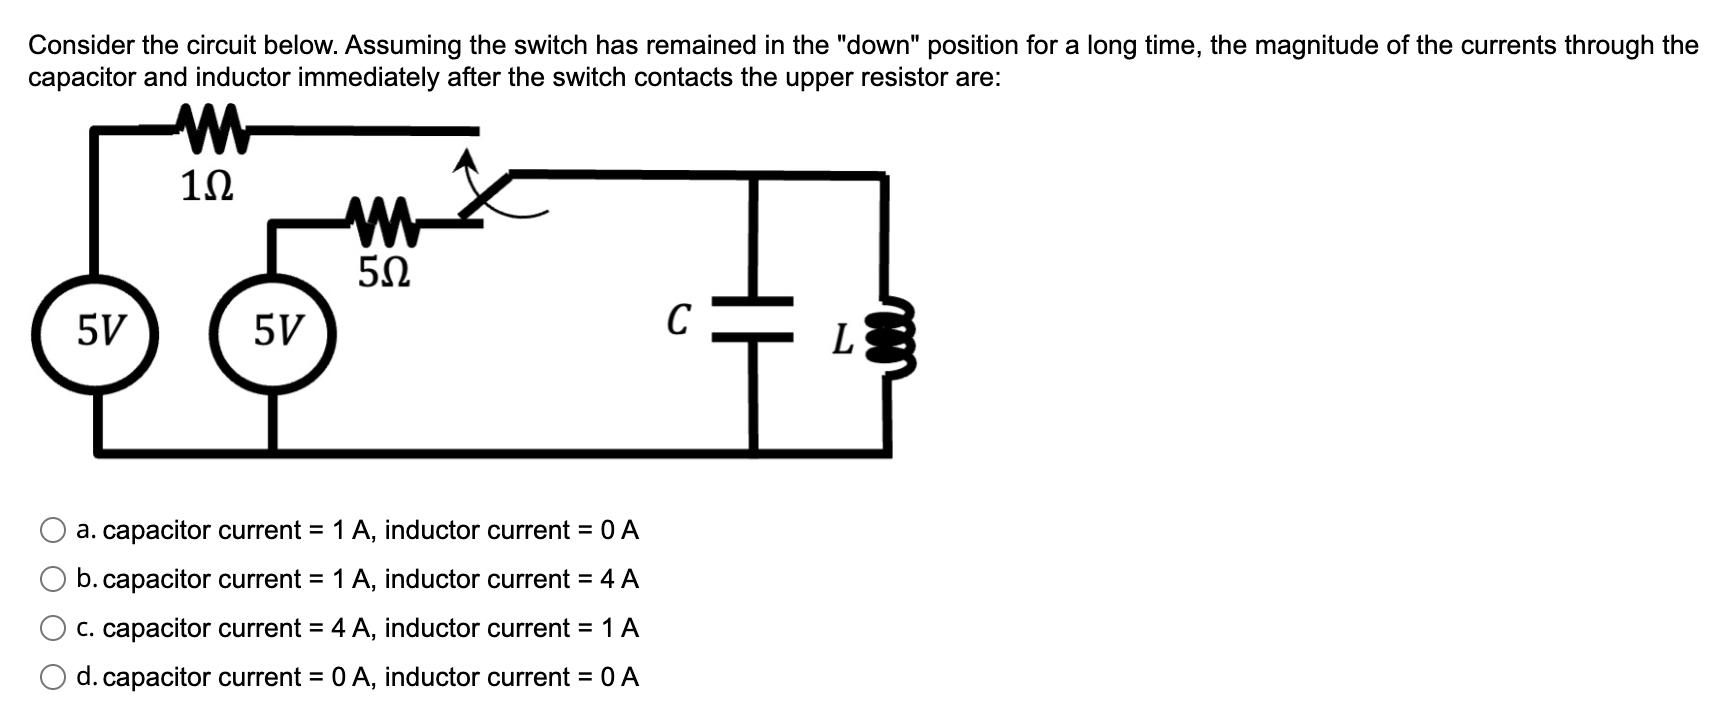 Consider the circuit below. Assuming the switch has remained in the 